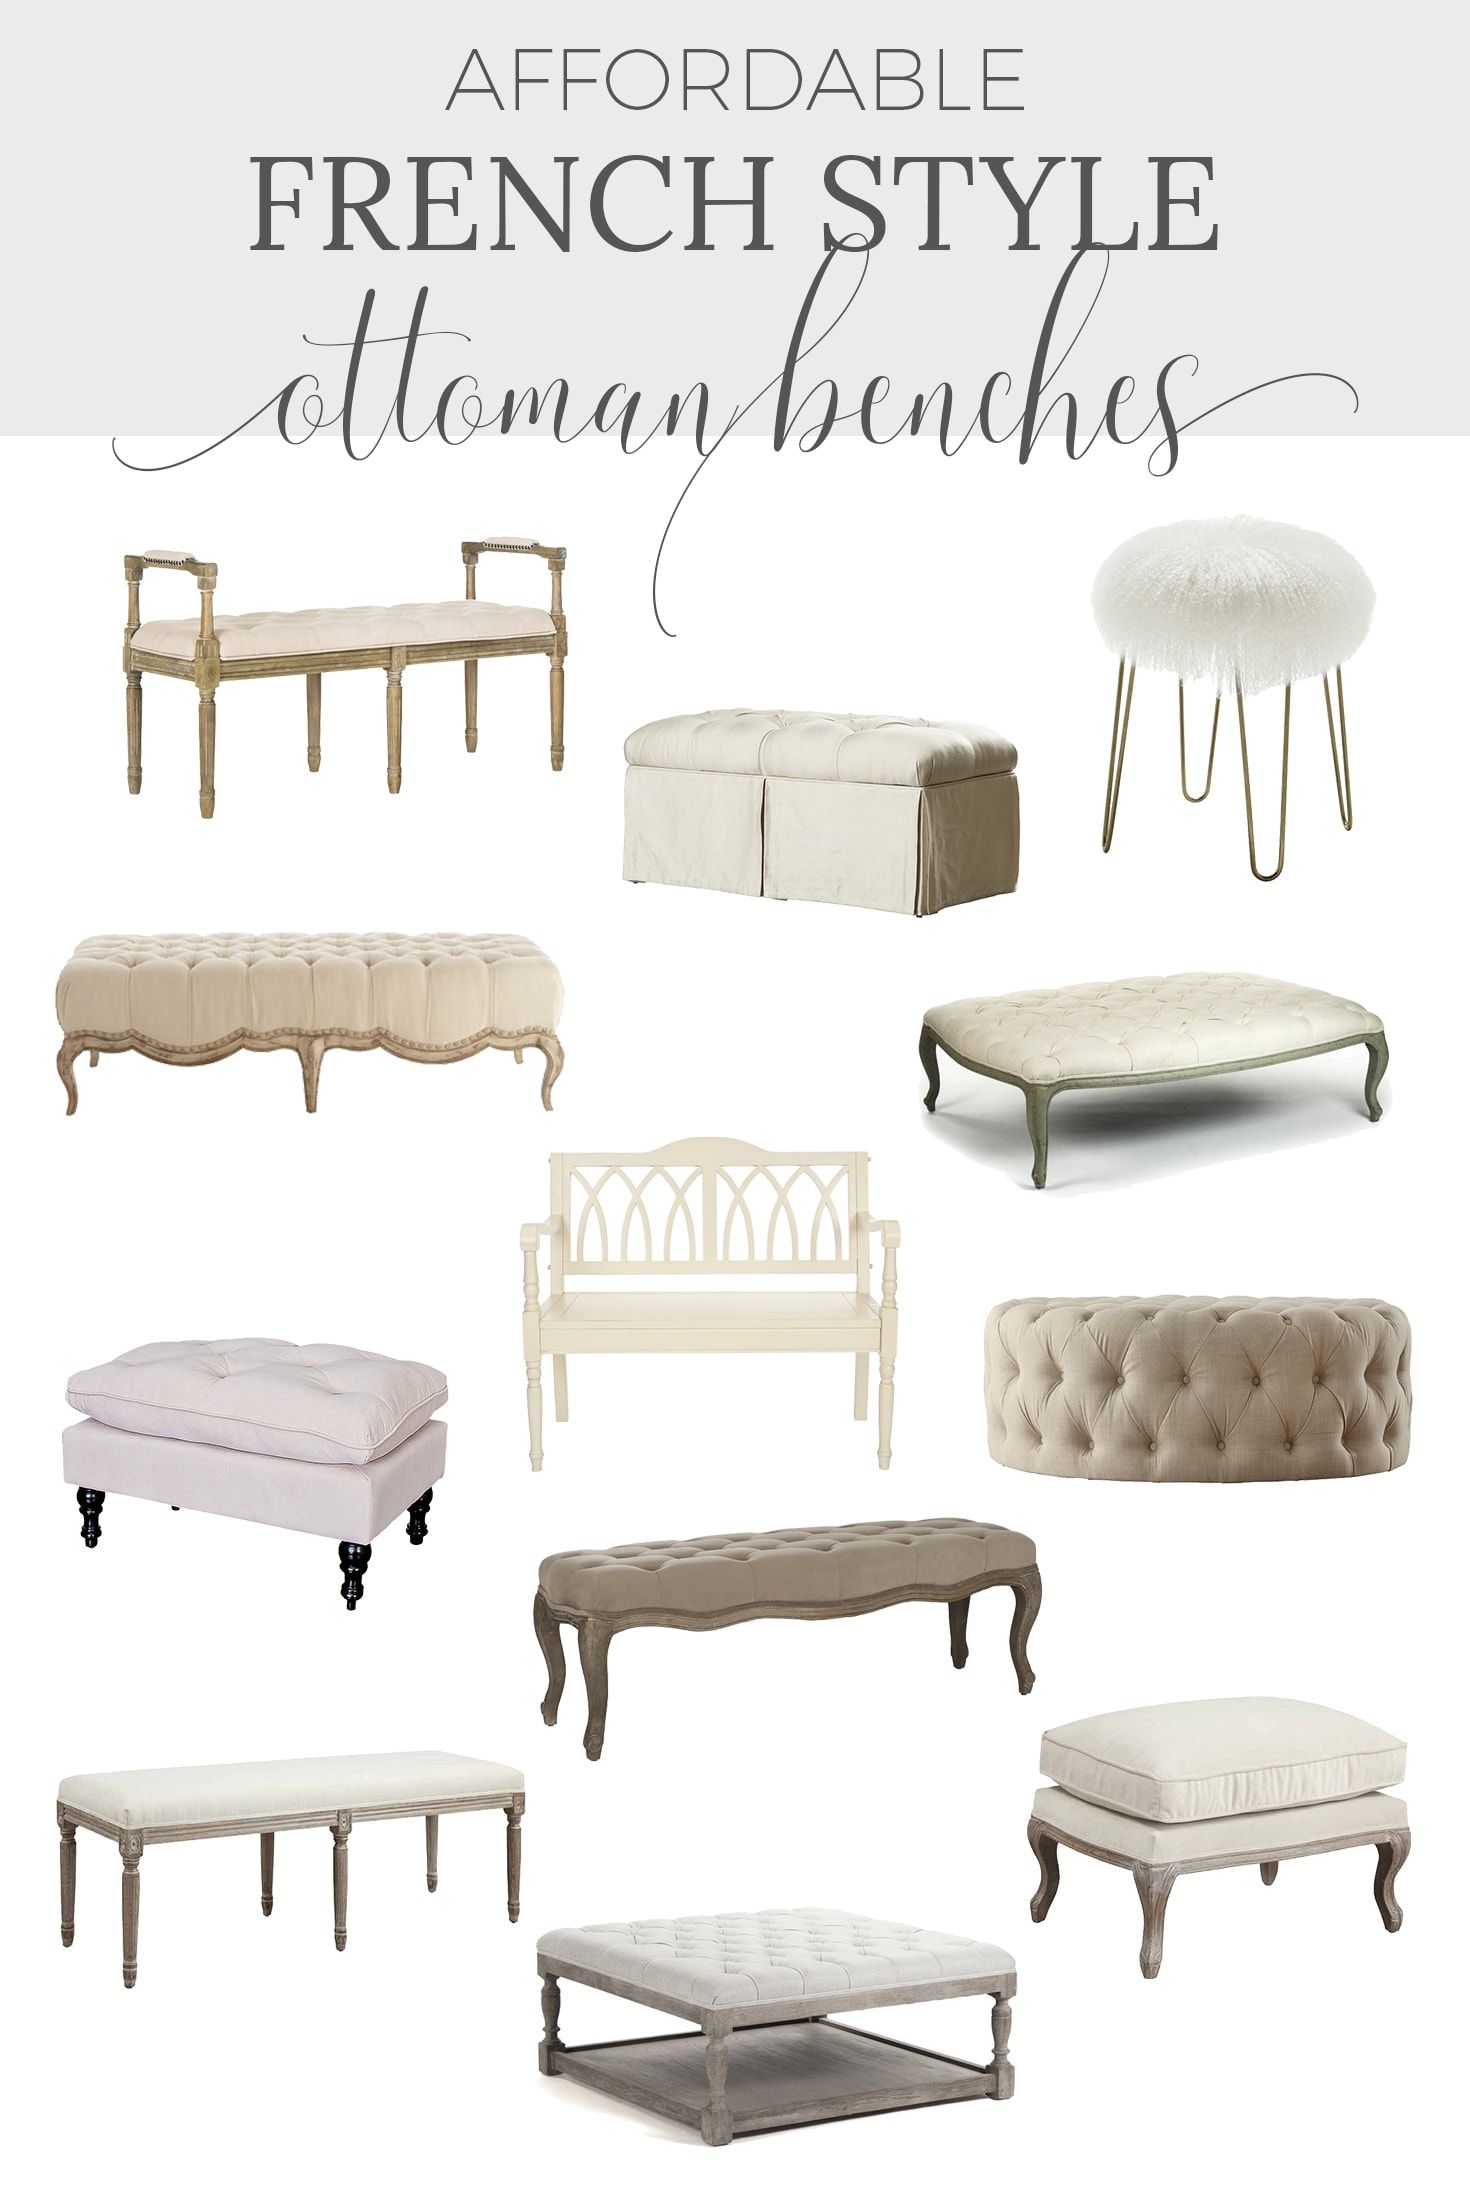 The Bedroom Bench: 20+ Affordable French Style Ottomans Inside Bench Ottomans (View 11 of 15)